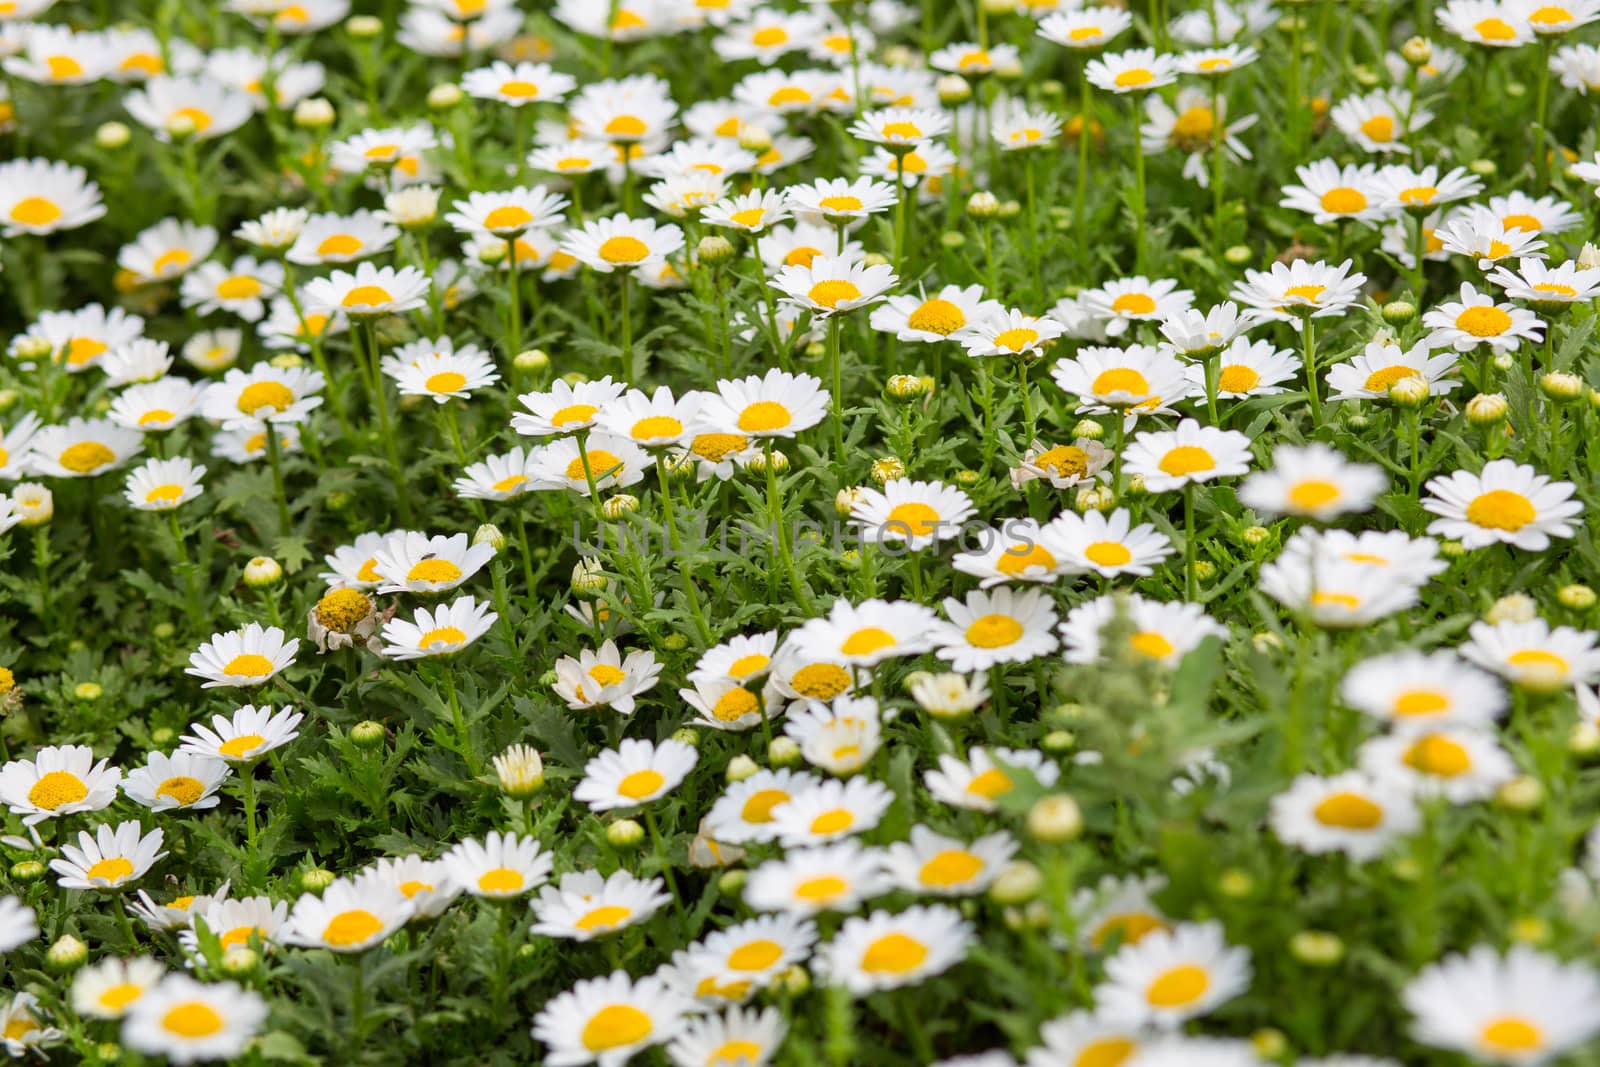 White and yellow daisies taken in a park in Shanghai during the summer.